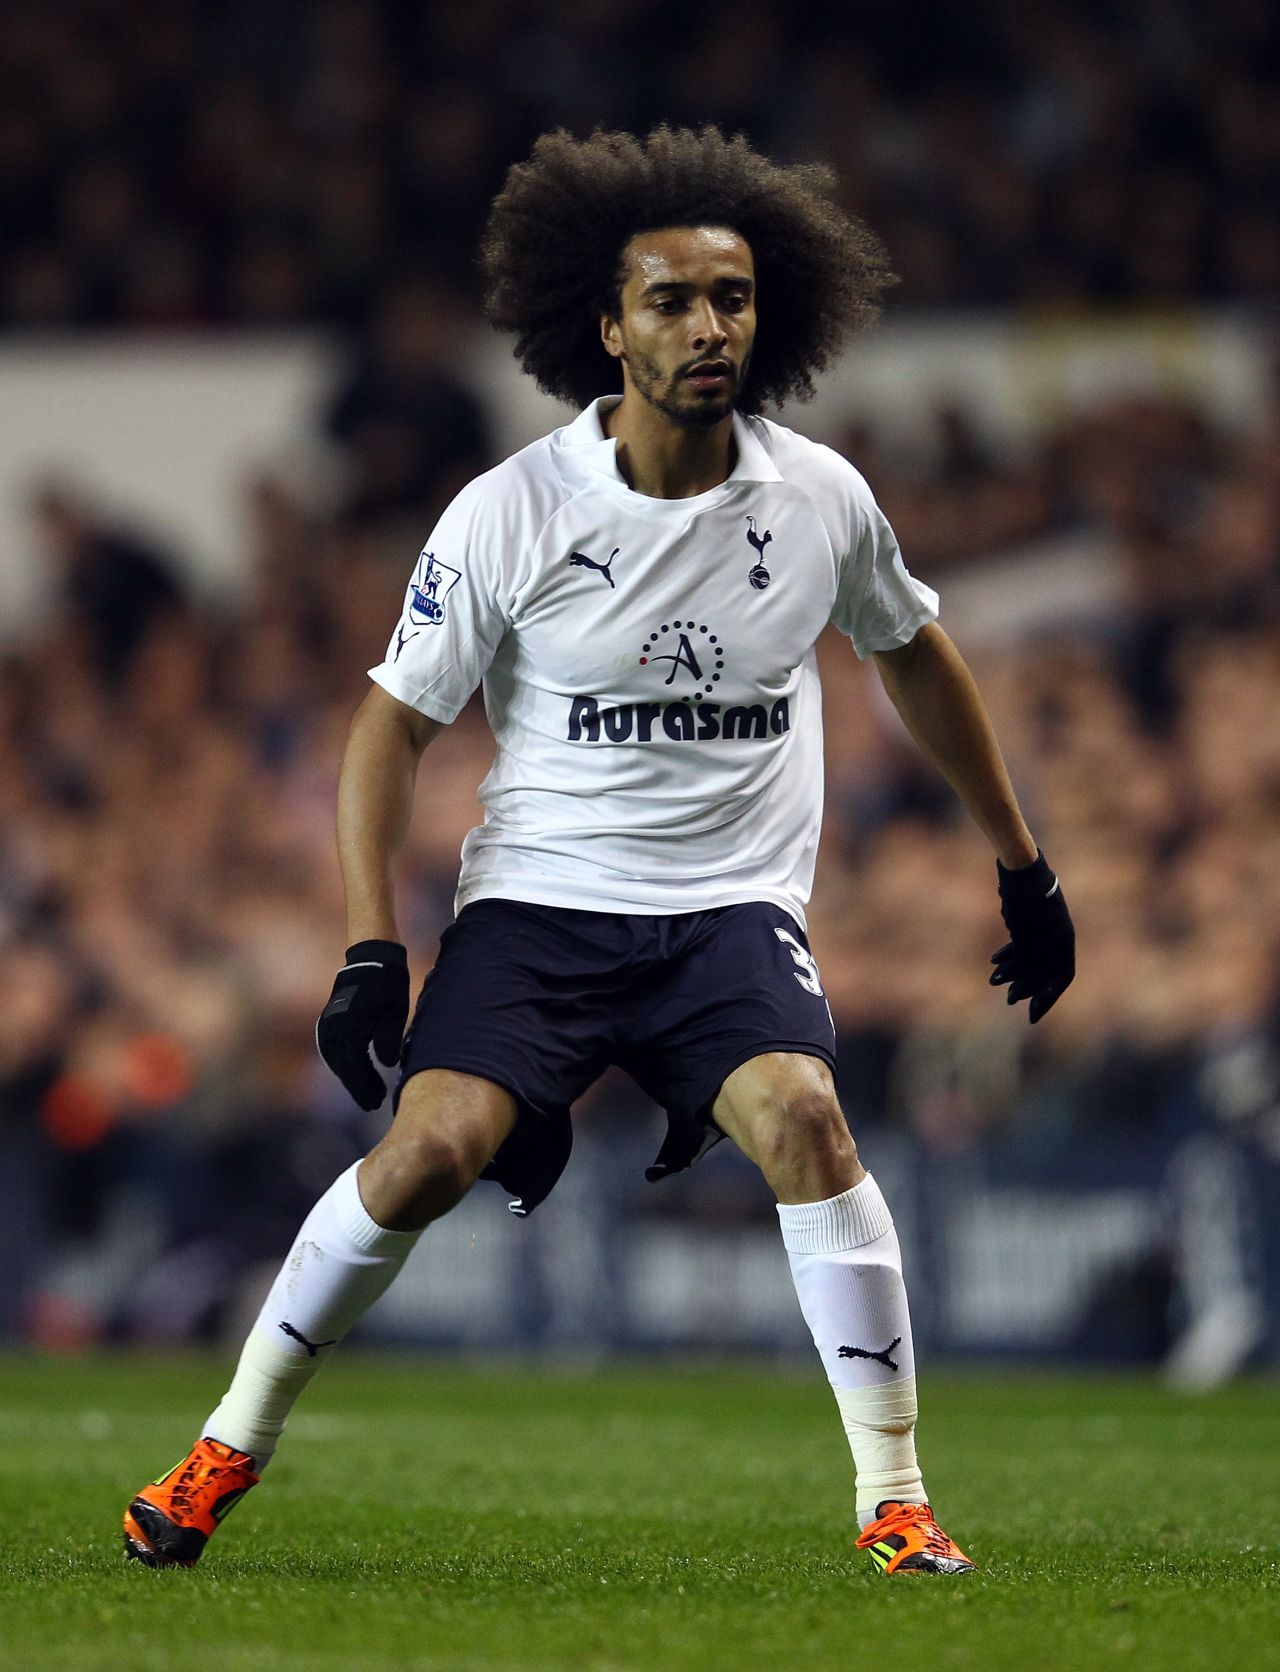 Benoit Assou-Ekotto is an attack-minded left back playing for Tottenham Hotspur in the English Premier League.